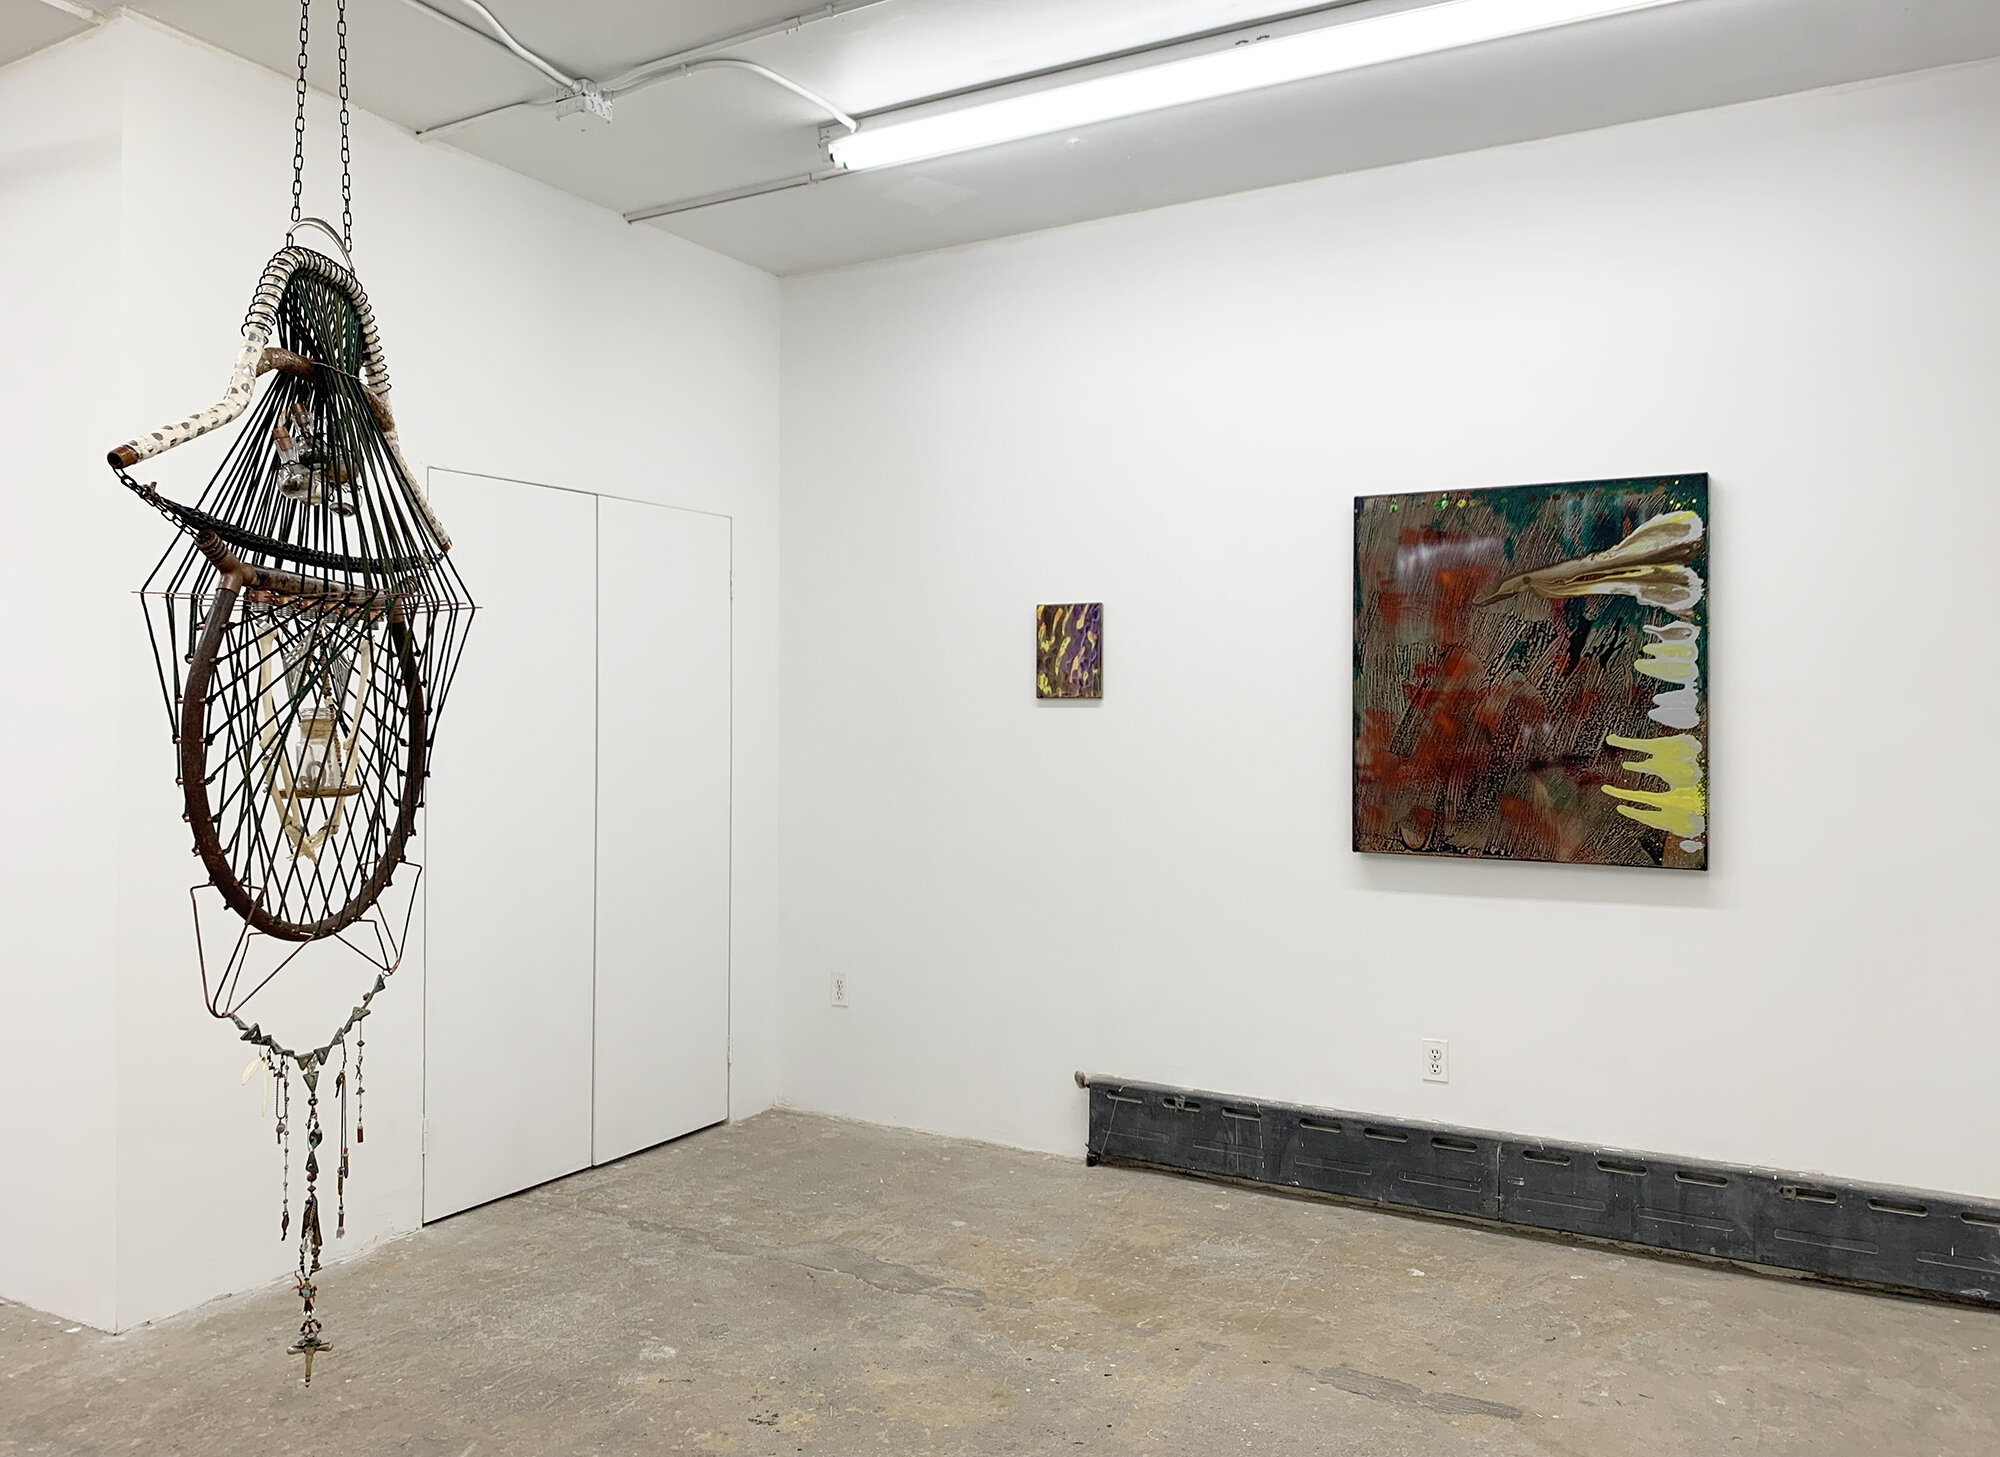 Julius Linnenbrink / Lorna Williams 2019 exhibition at Cindy Rucker Gallery, installation images of a Lorna Williams a sculpture and Julius Linnenbrink paintings 